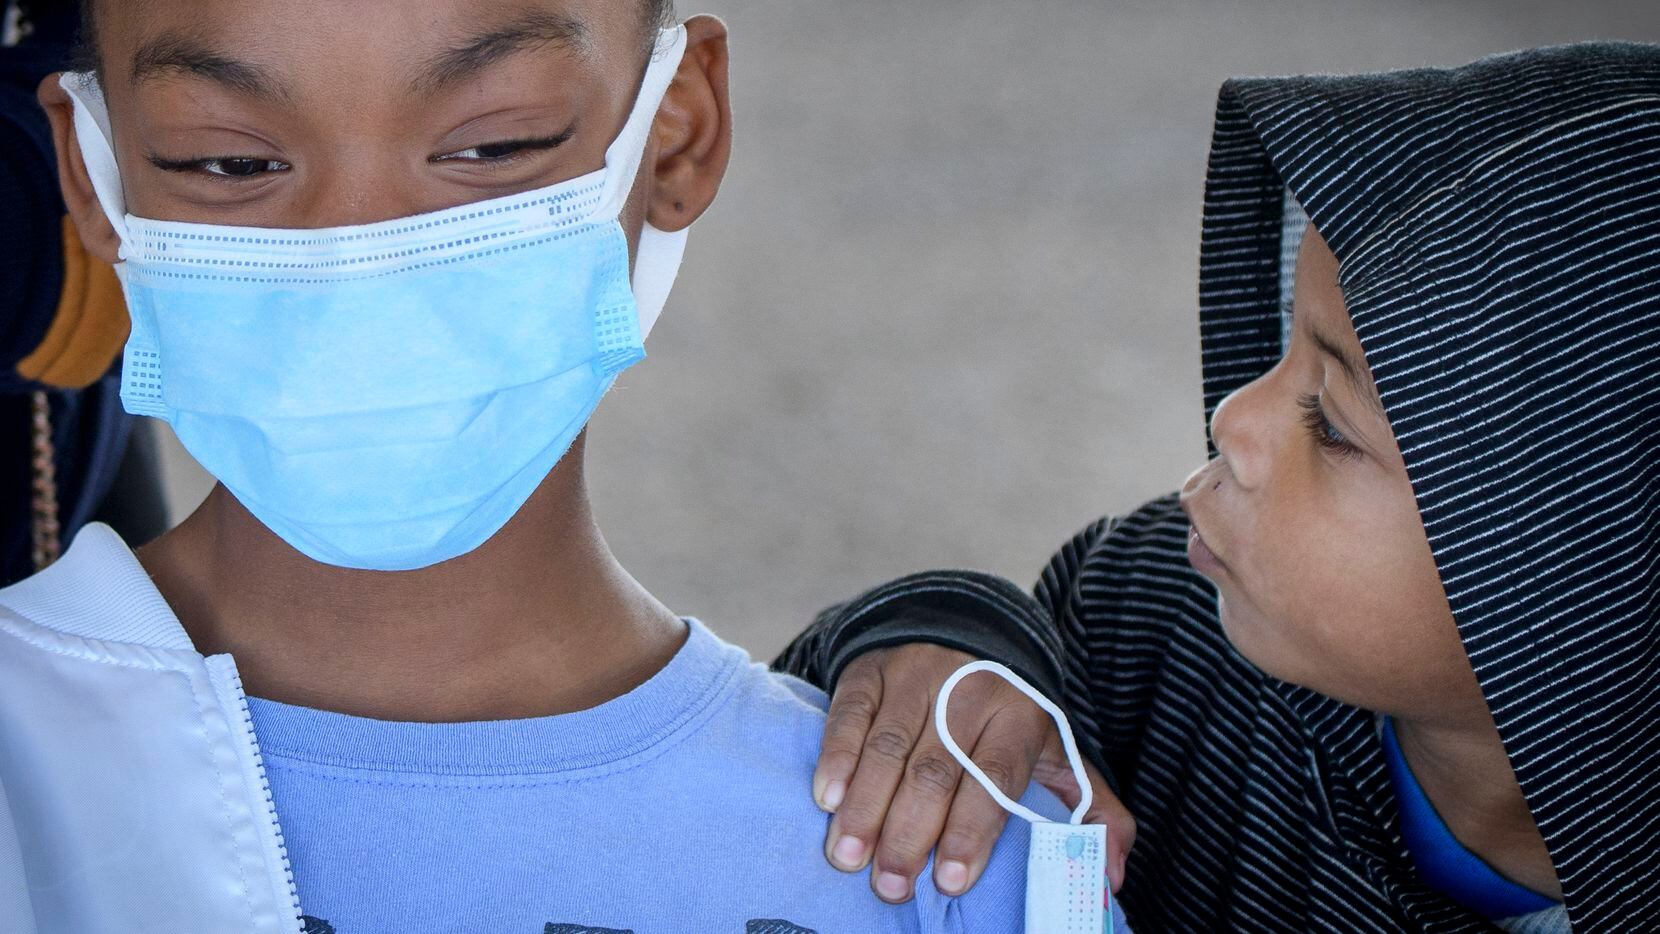 Ten-year-old Kaya Rougeau (cq) gets encouragement from her little brother Kyrie Rogeau prior to getting  her COVID vaccination at the drive-up site outside the Wilkerson-Greines Activity Center in Fort Worth, Texas on November 4, 2021. (Robert W. Hart/Special Contributor)